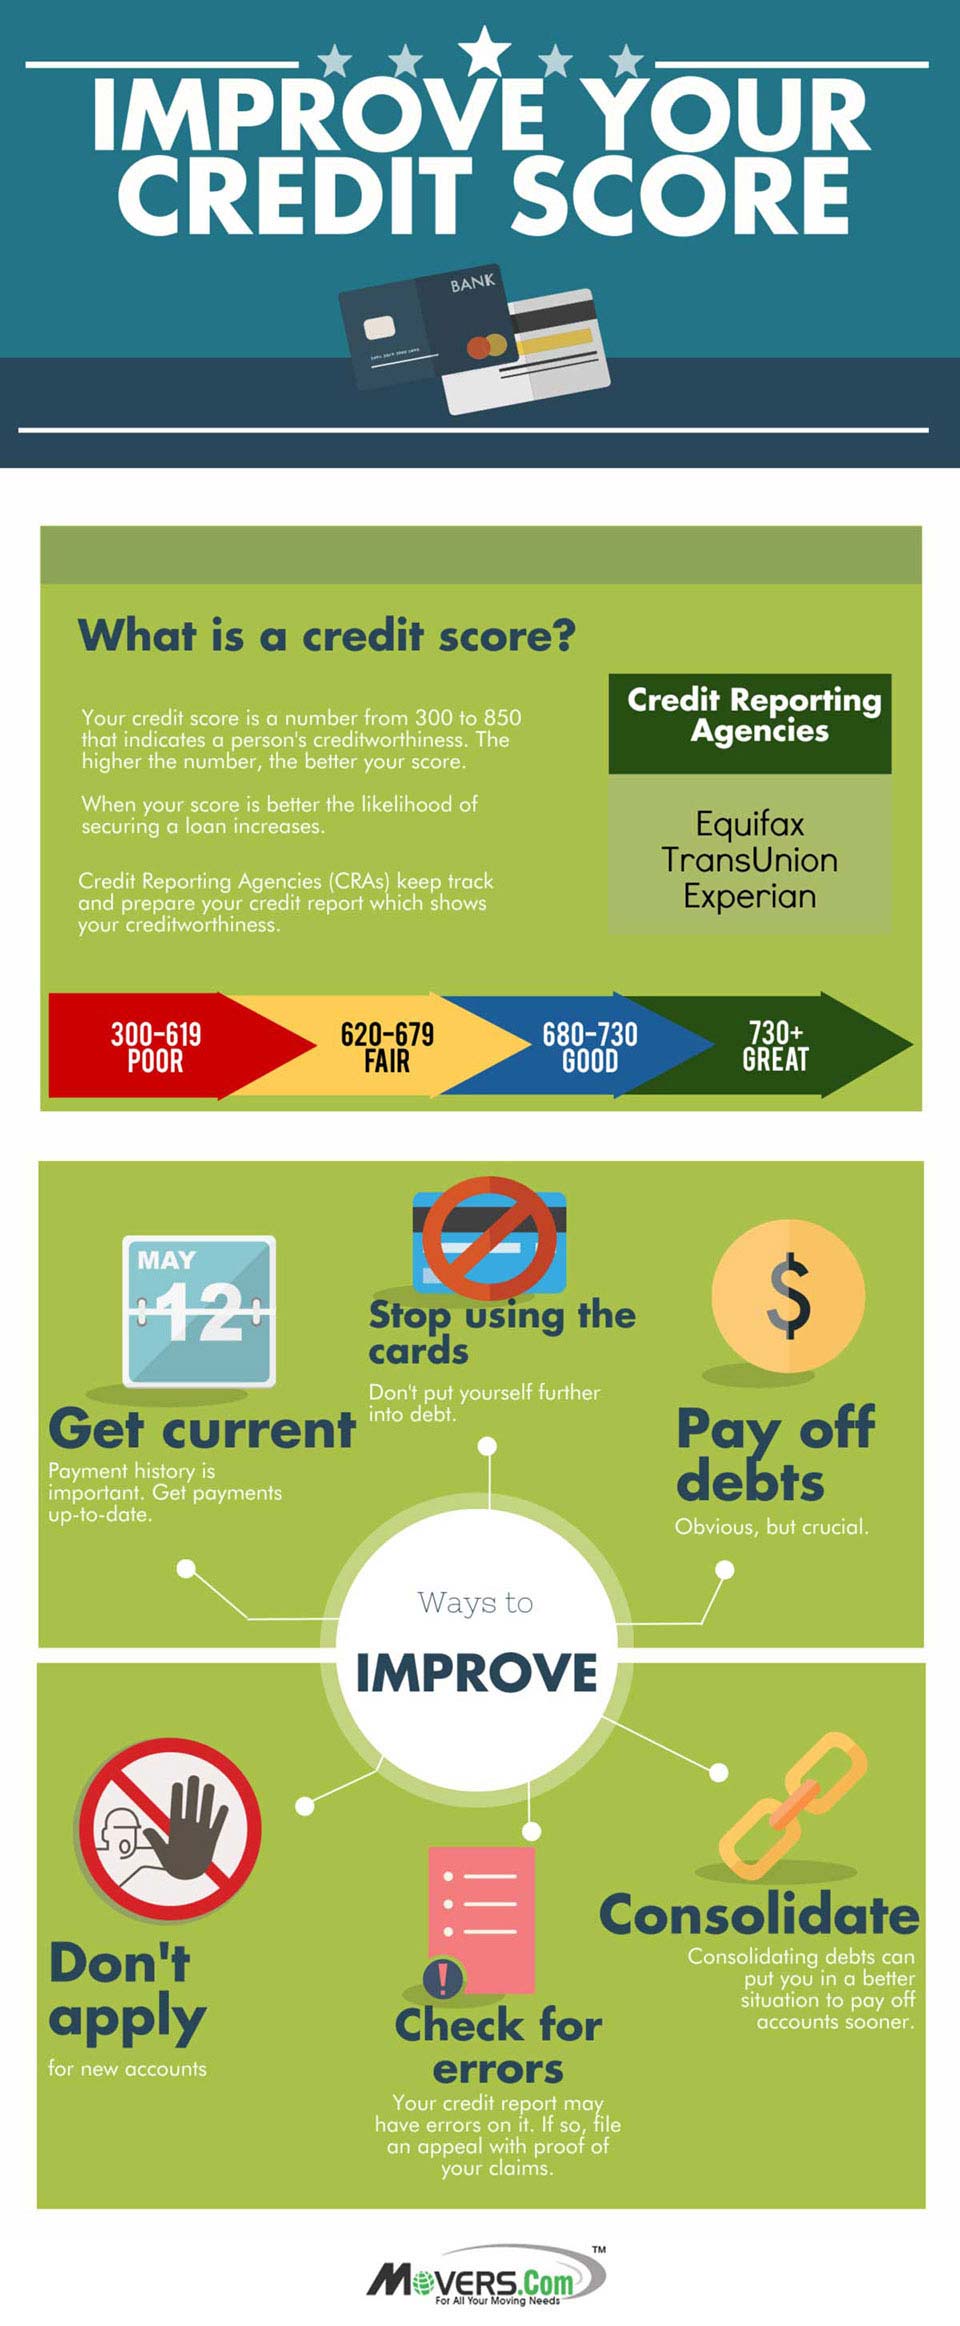 Tips for Improving Credit Score